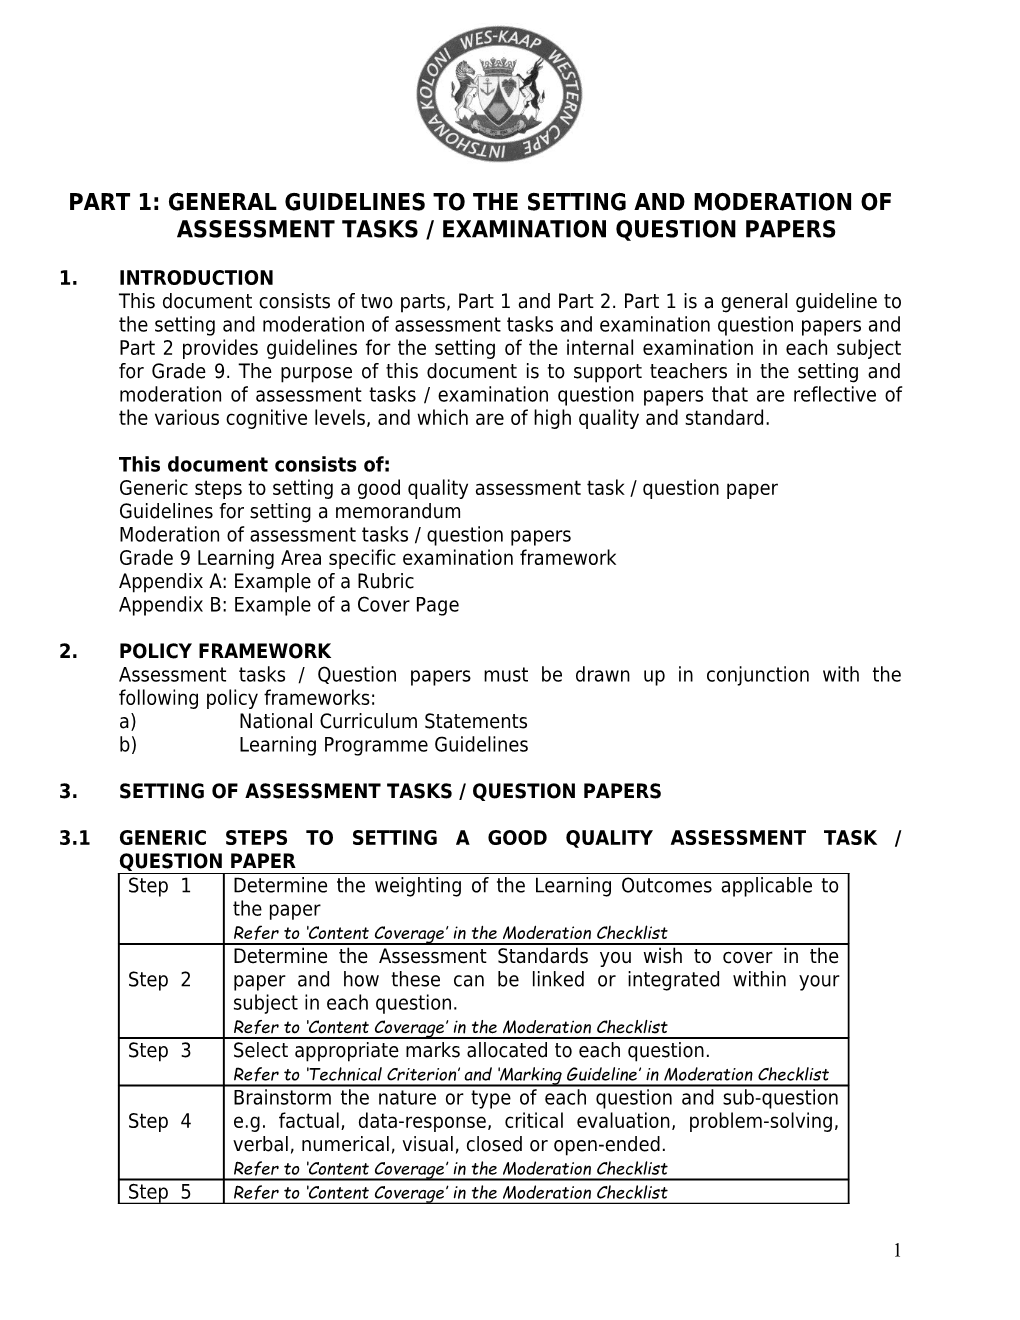 Part 1: General Guidelines to the Setting and Moderation of Assessment Tasks / Examination